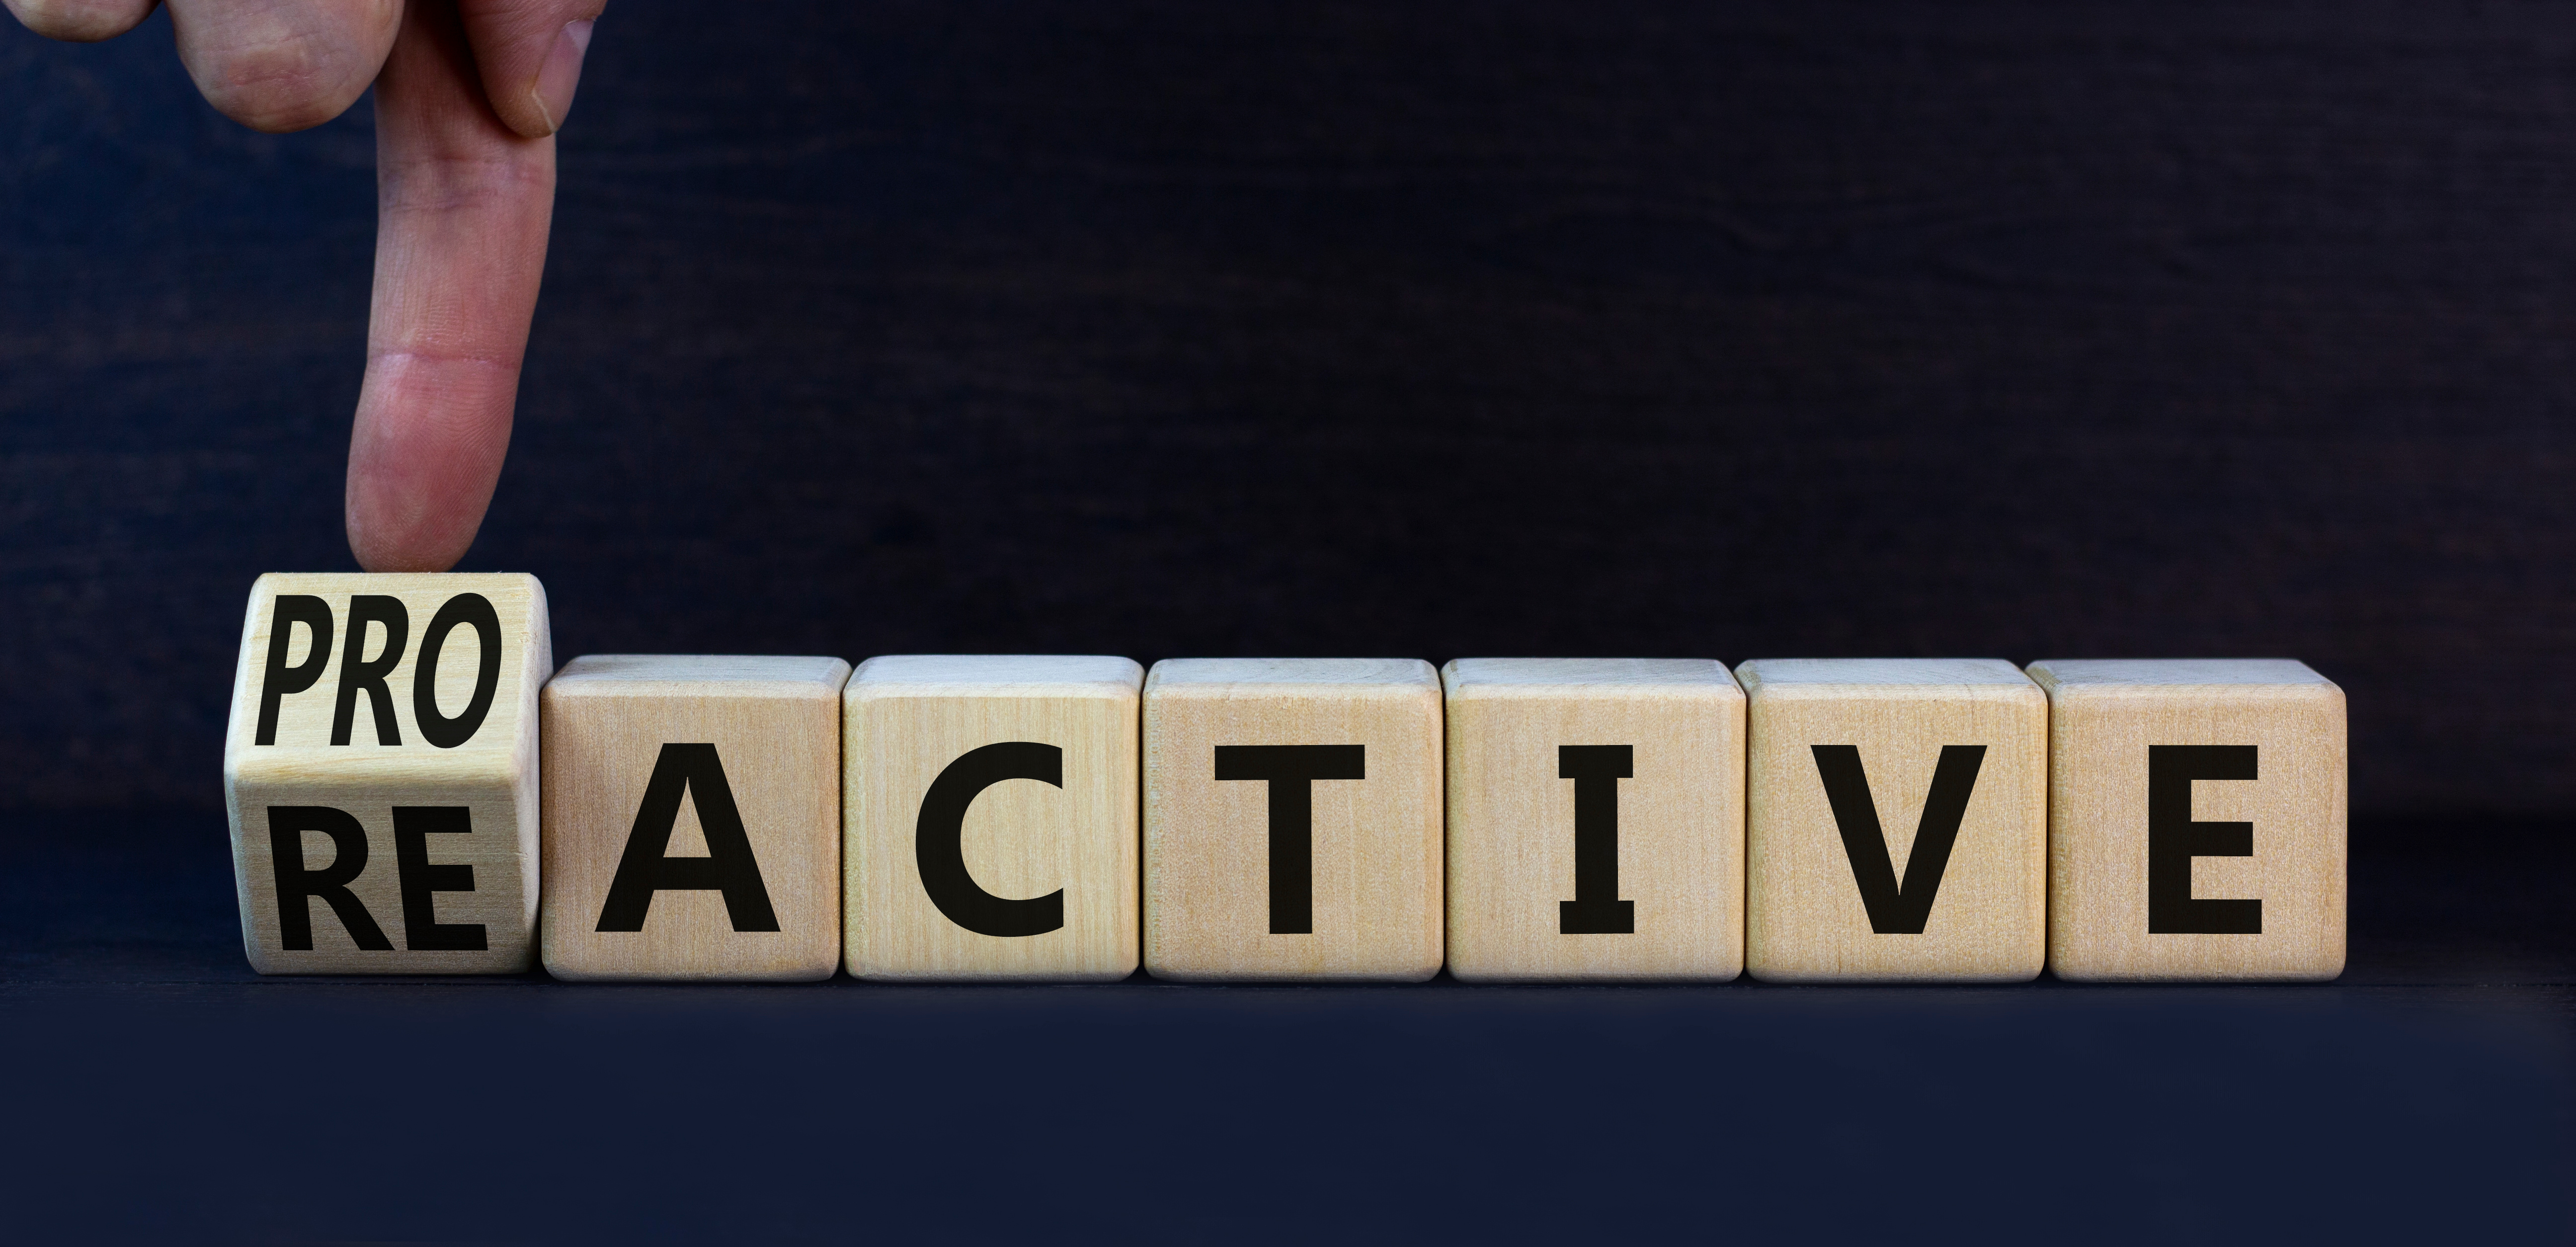 Reactive or proactive symbol. Turned wooden cubes and changed the concept word reactive to proactive. Beautiful grey table grey background, copy space.Business and reactive or proactive concept.